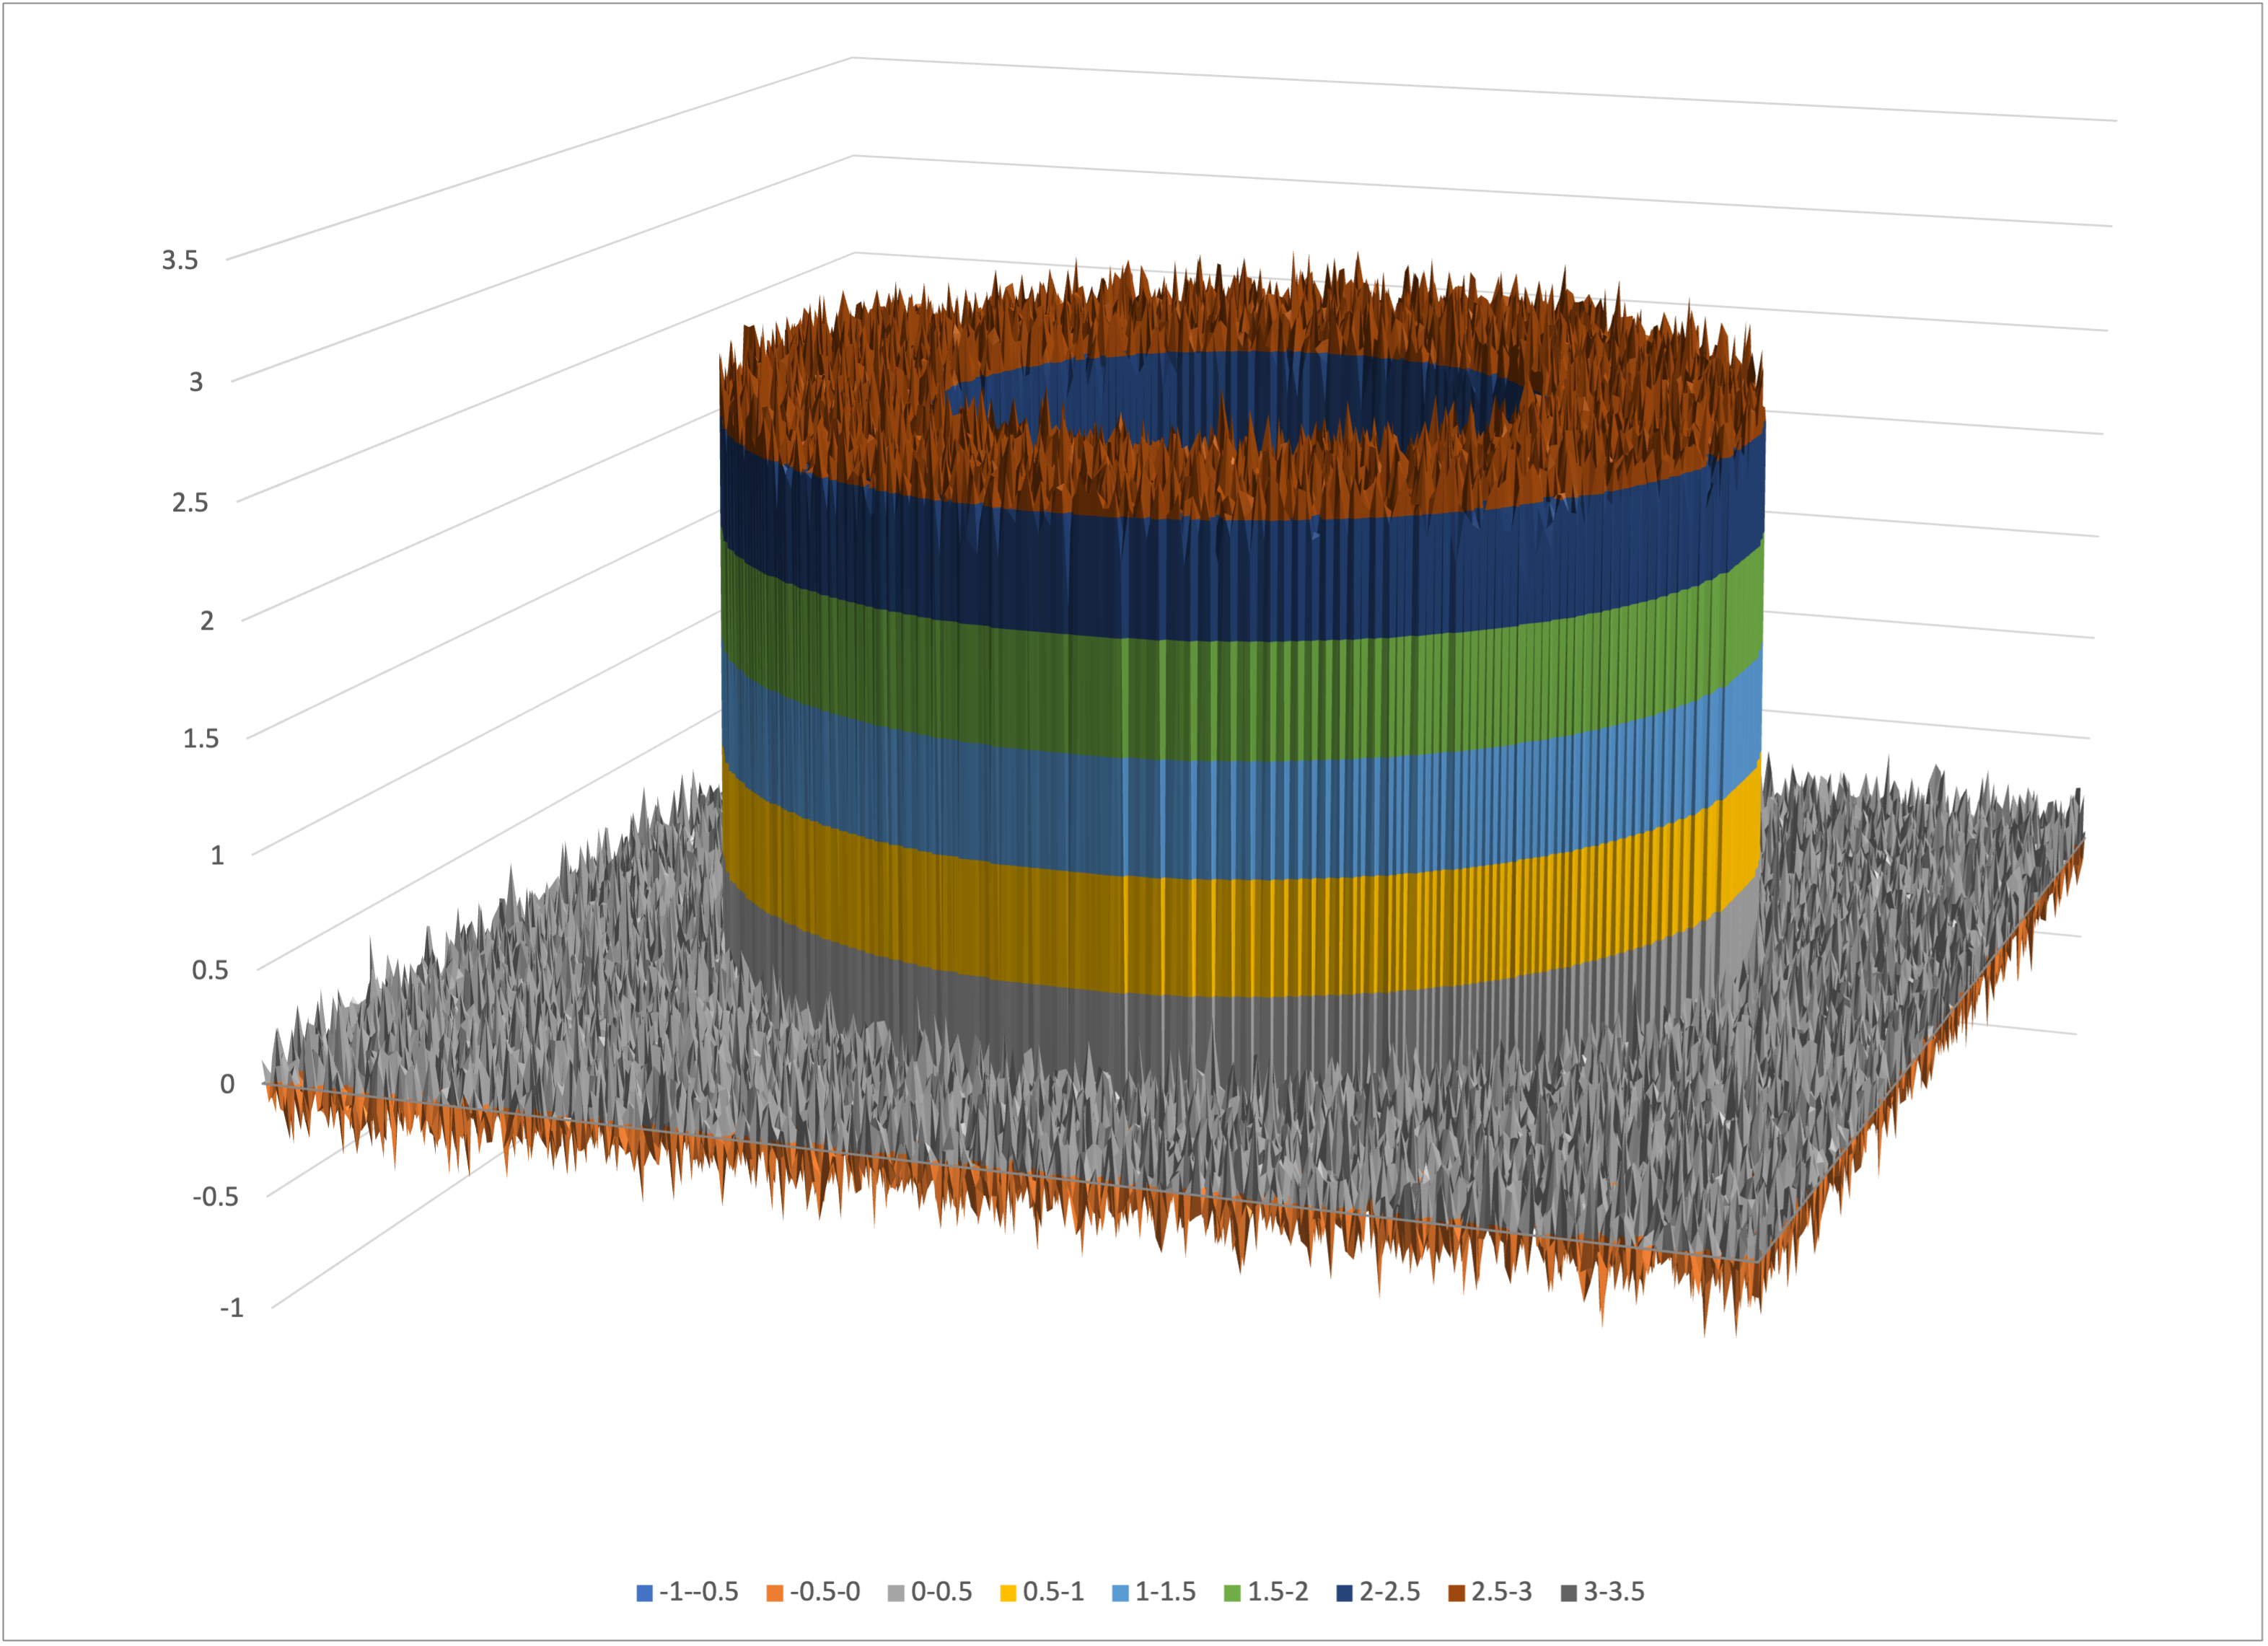 Excel's surface chart of tube-excel.csv